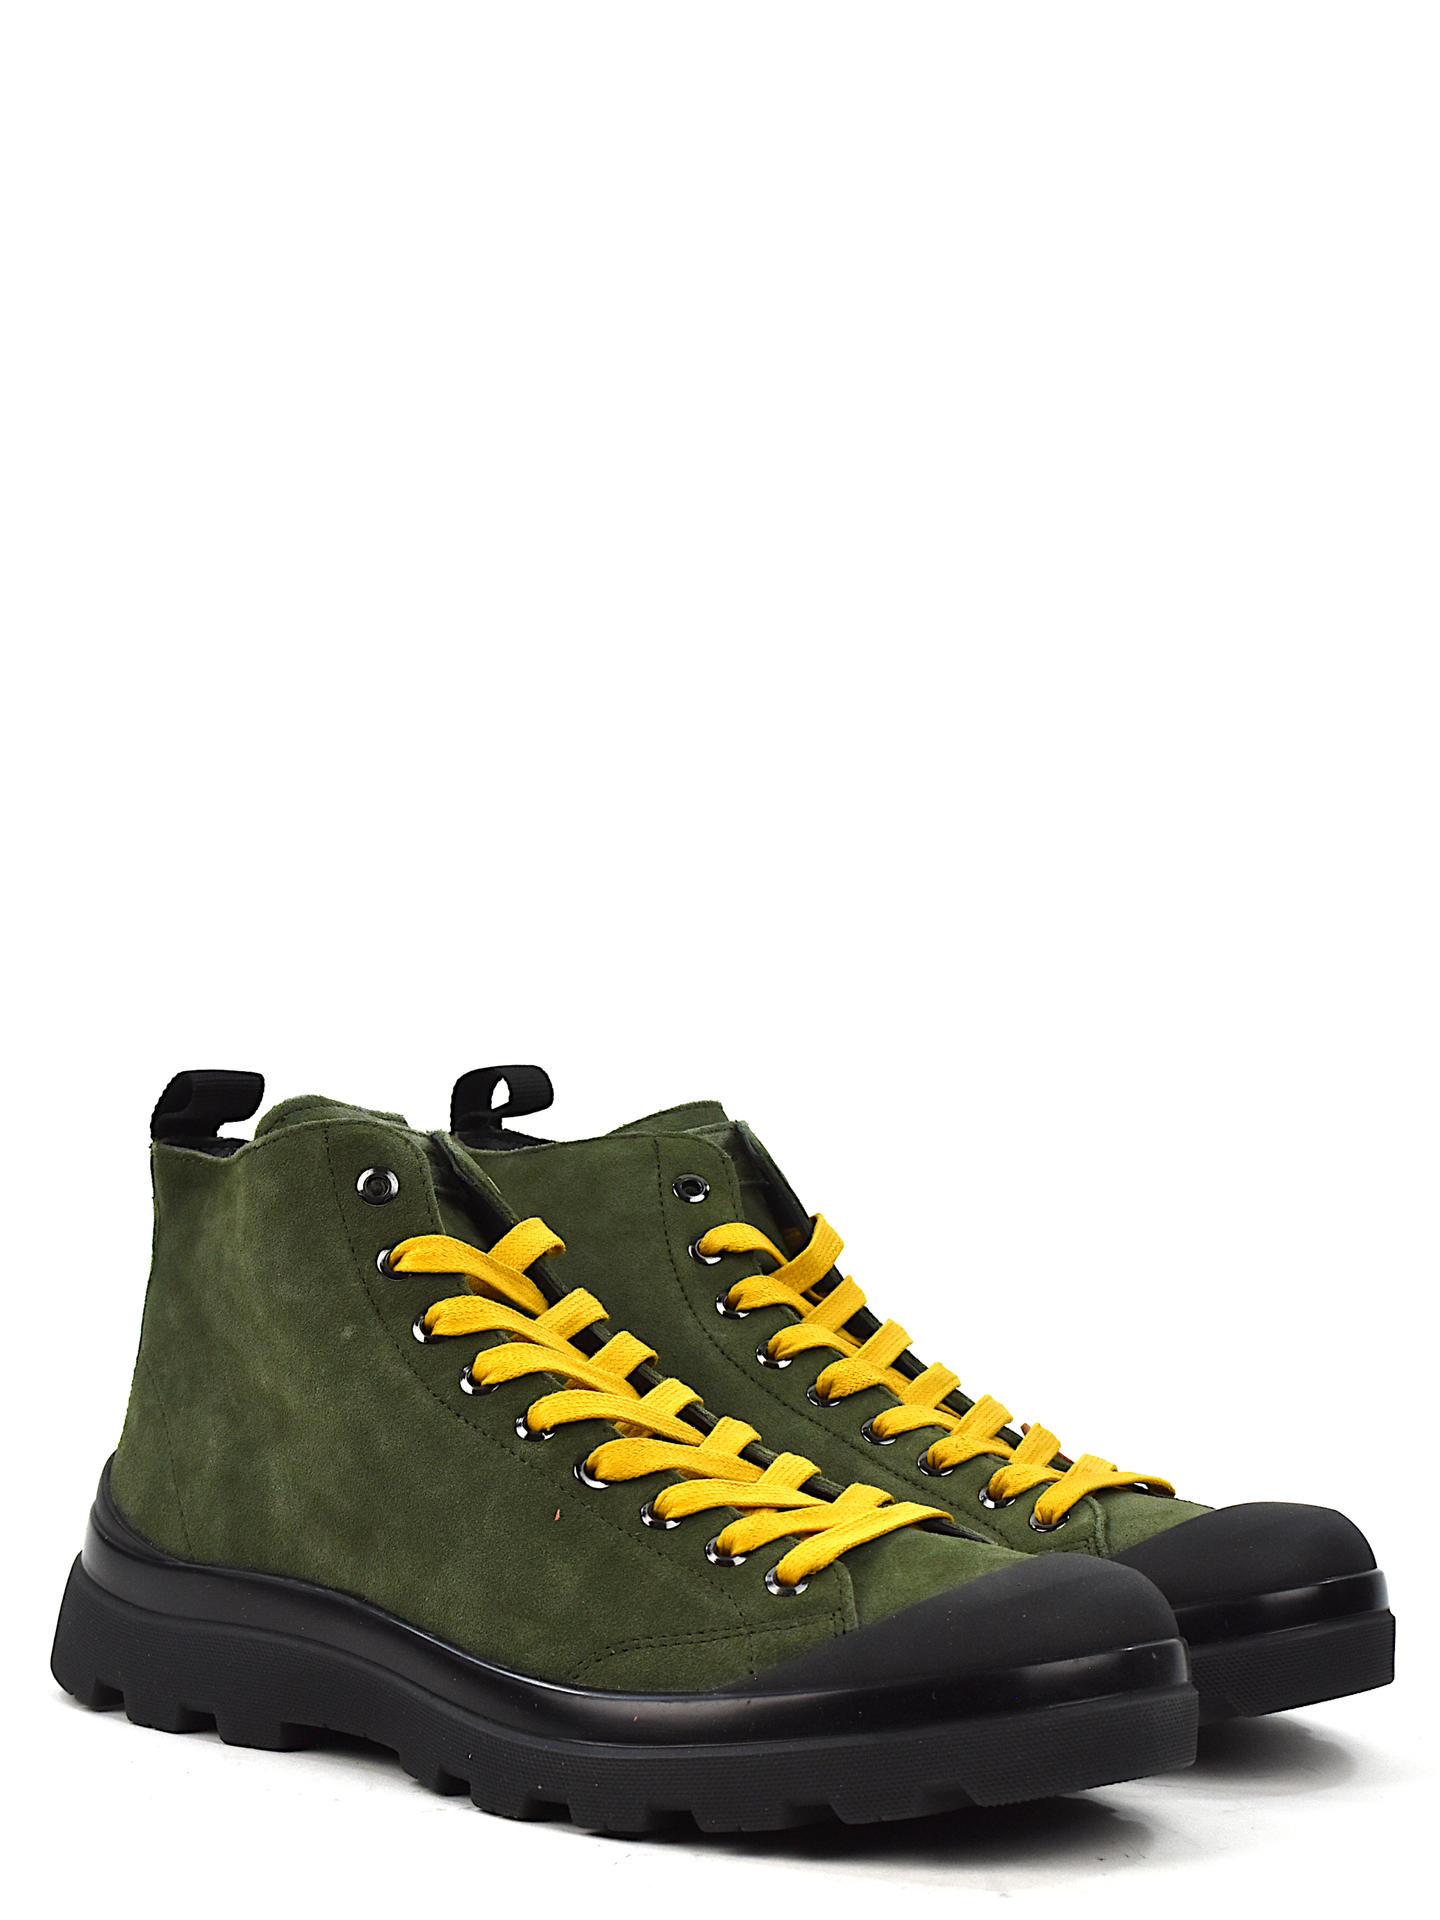 SNEAKERS PANCHIC 03M001 MILITARE